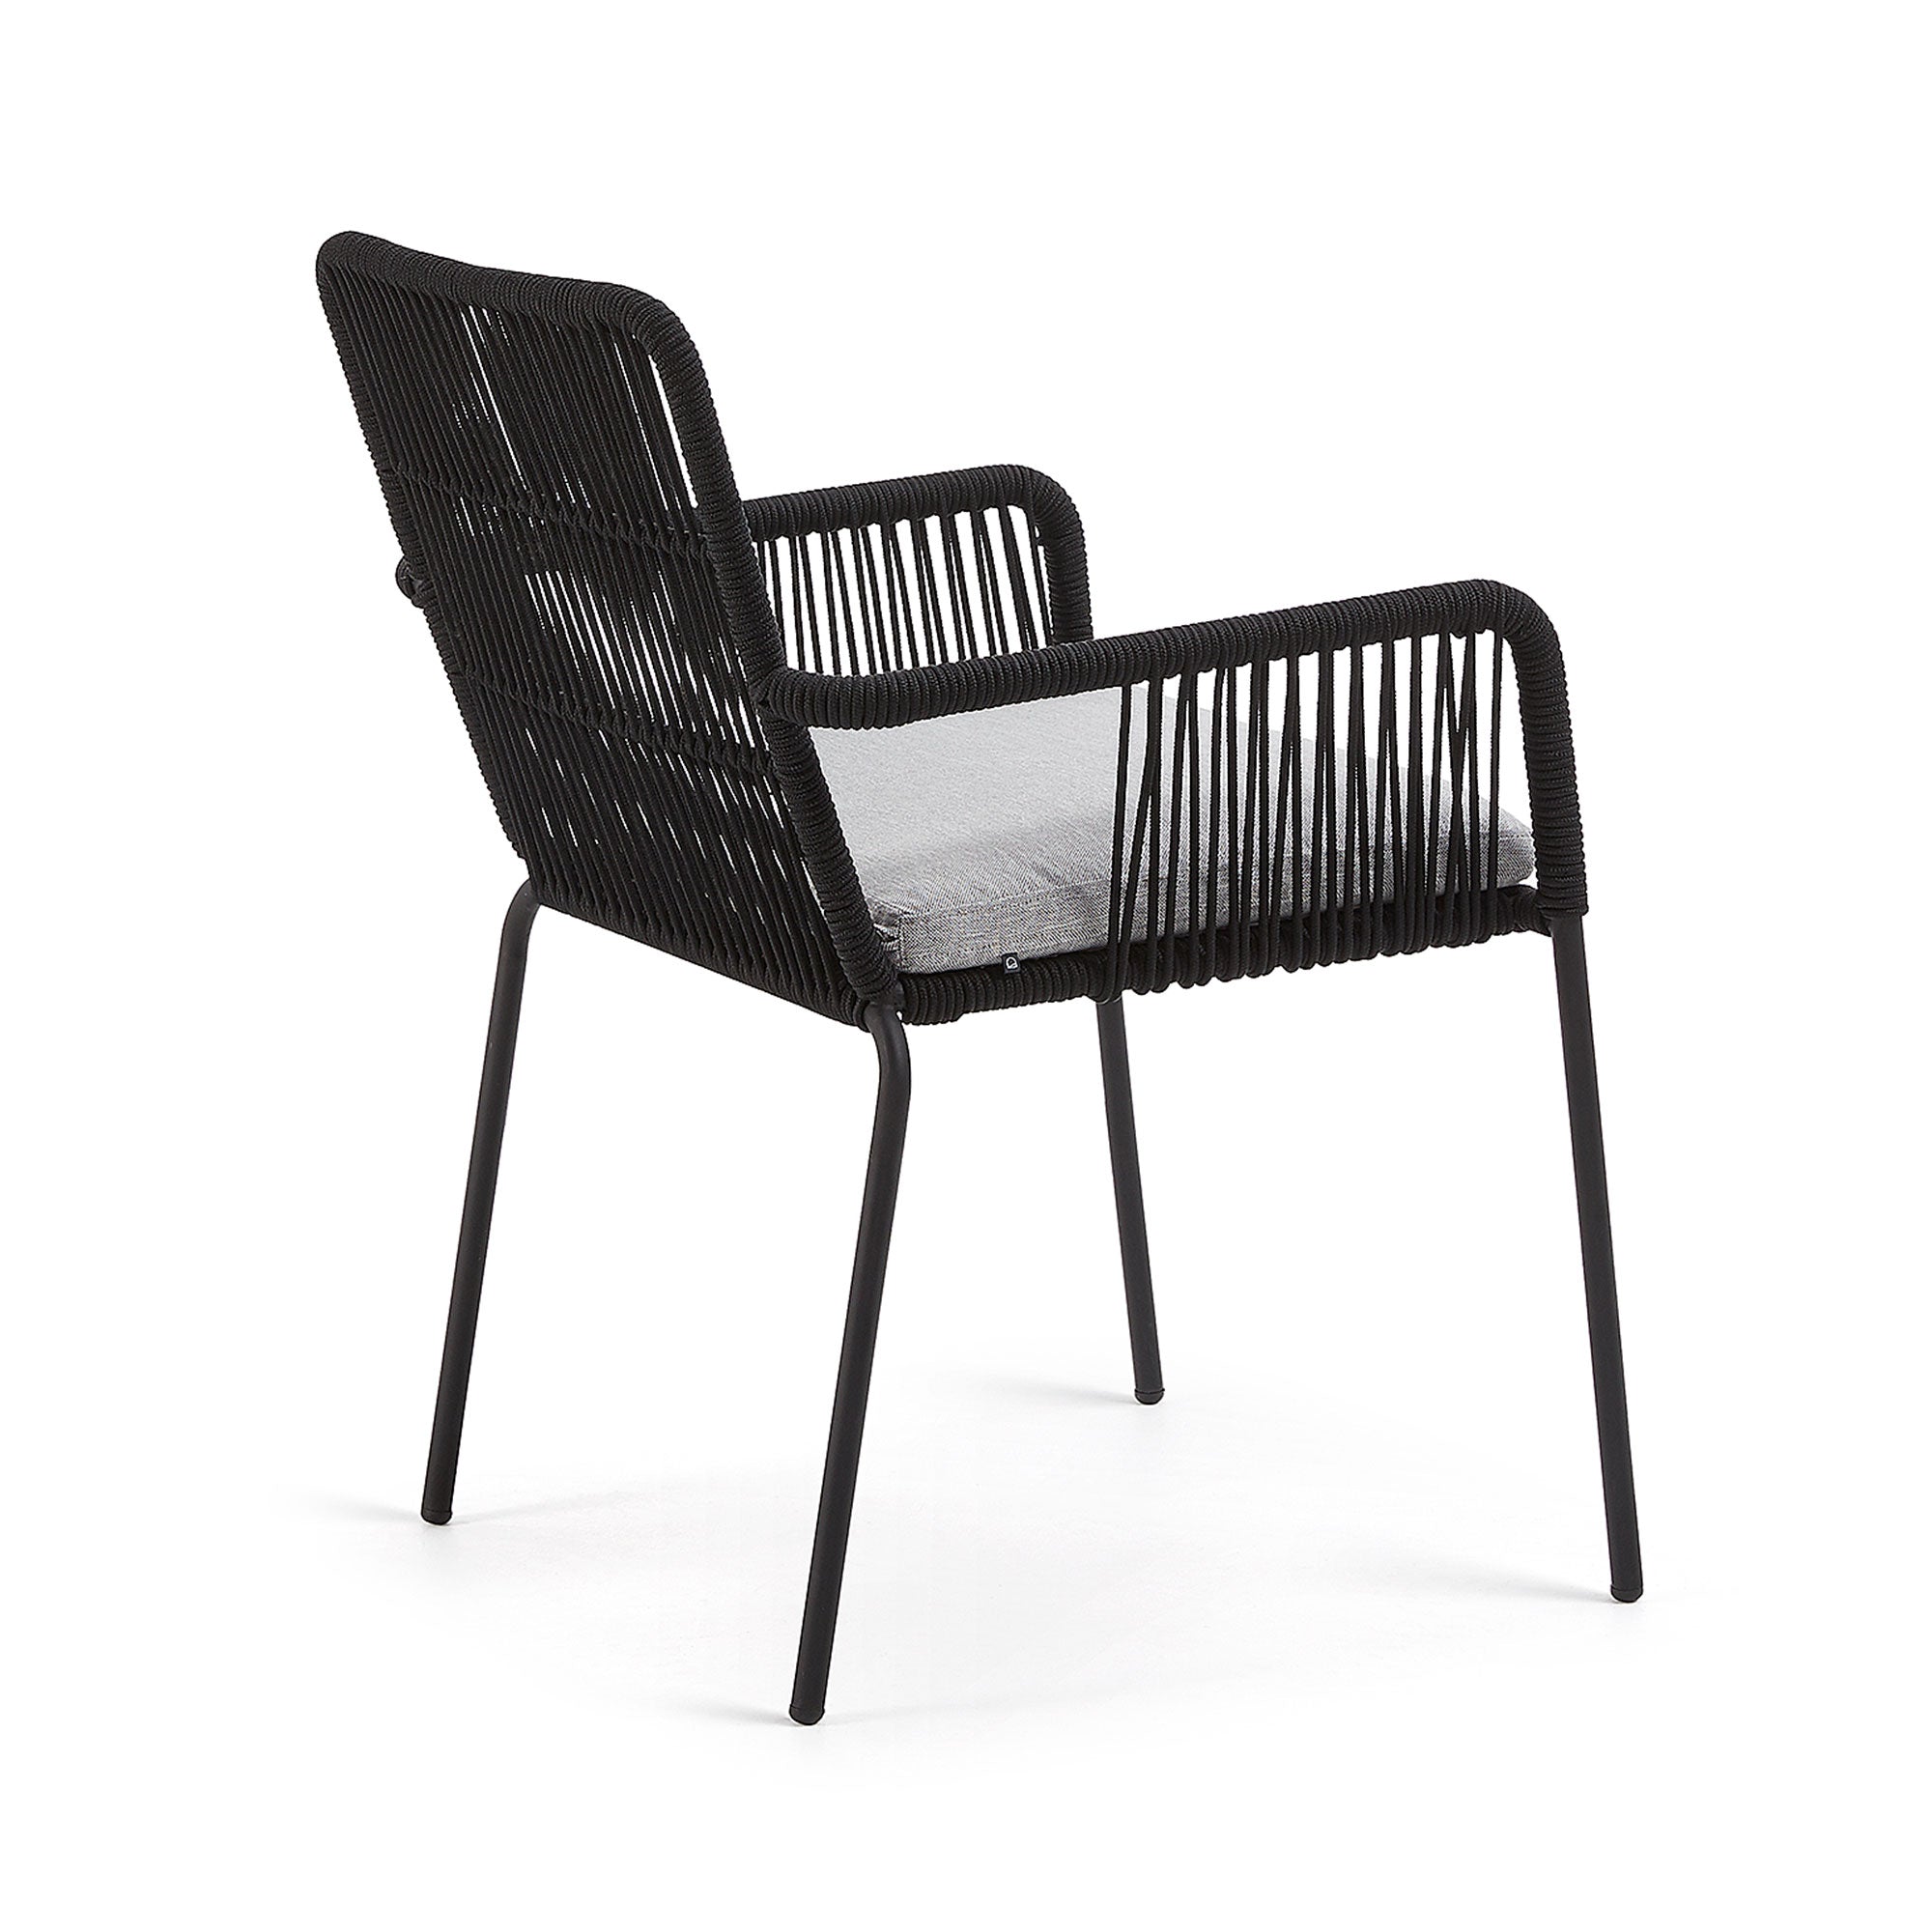 Samanta stackable chair made from black cord and galvanised steel legs.